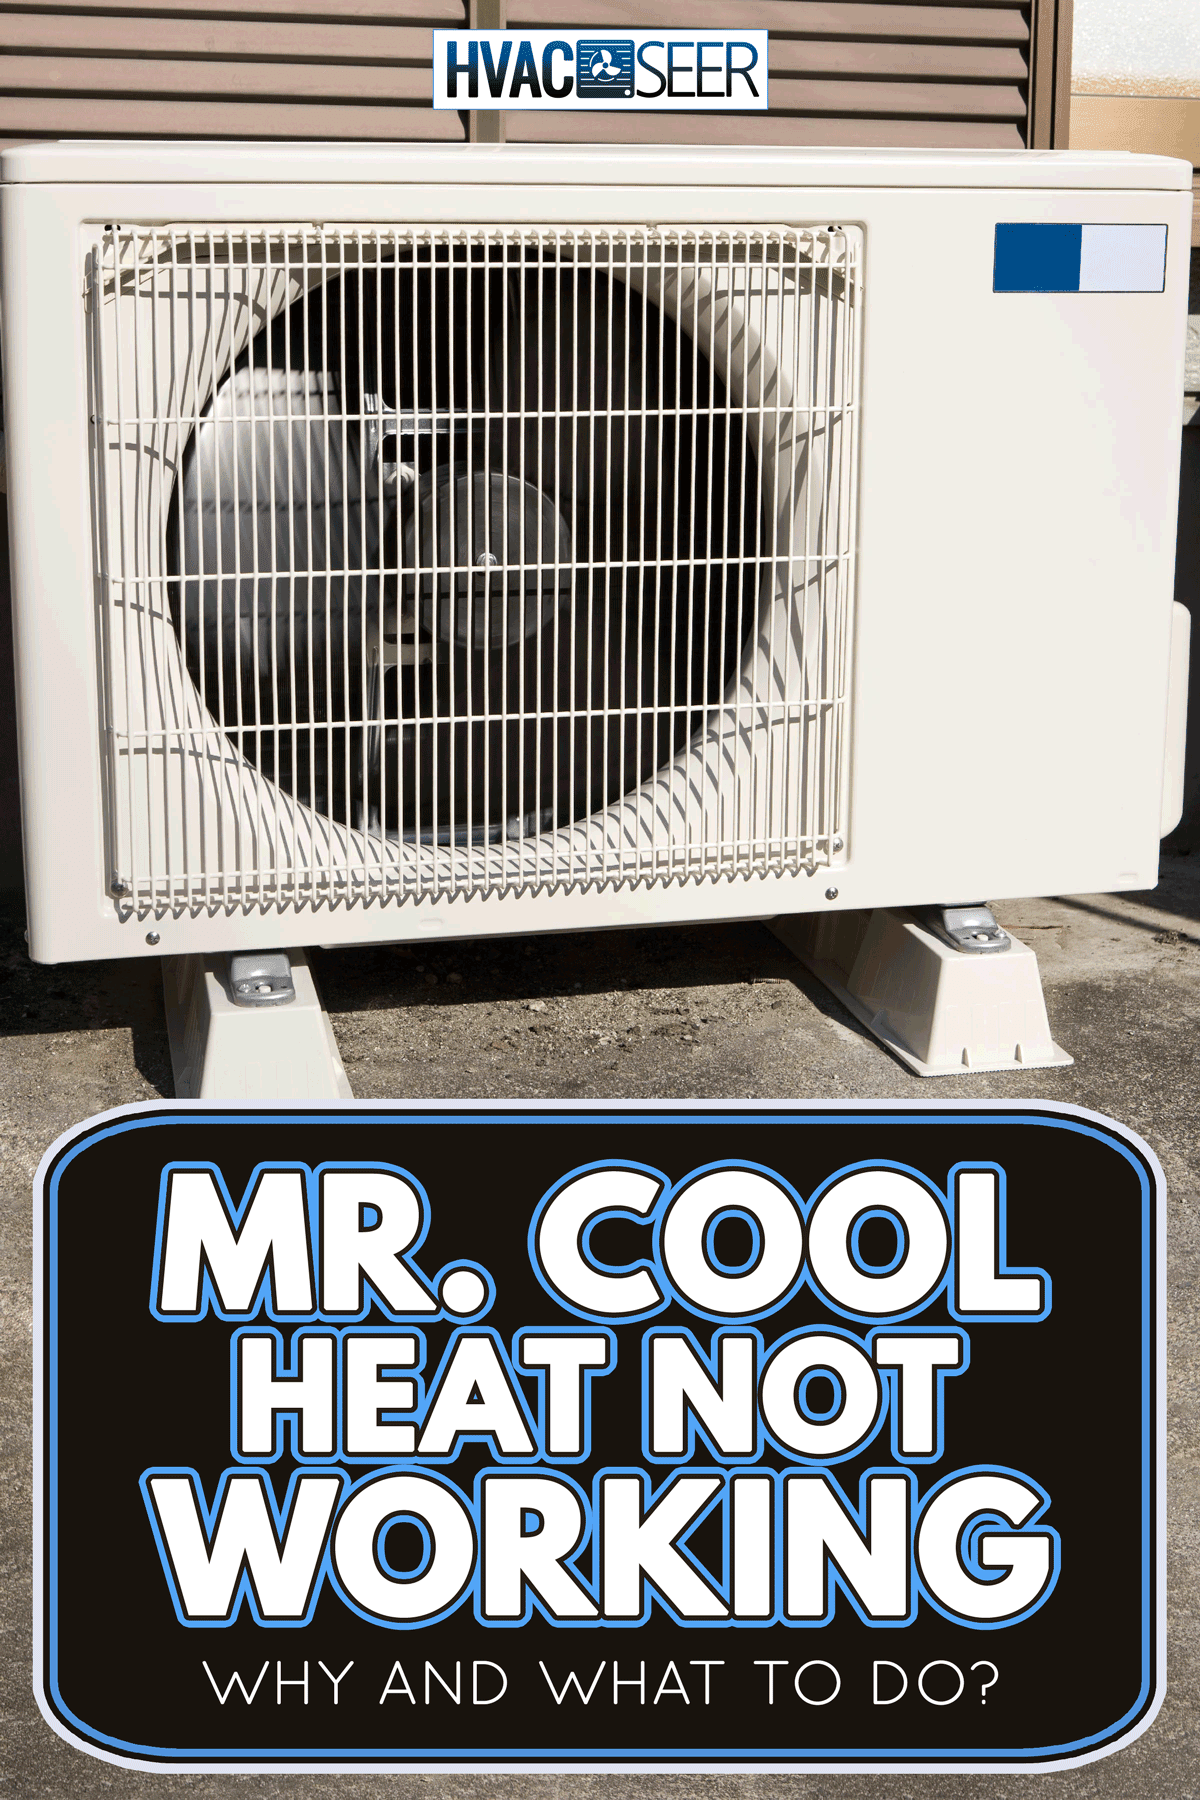 An outdoor unit of air conditioner, Mr. Cool Heat Not Working - Why And What To Do?